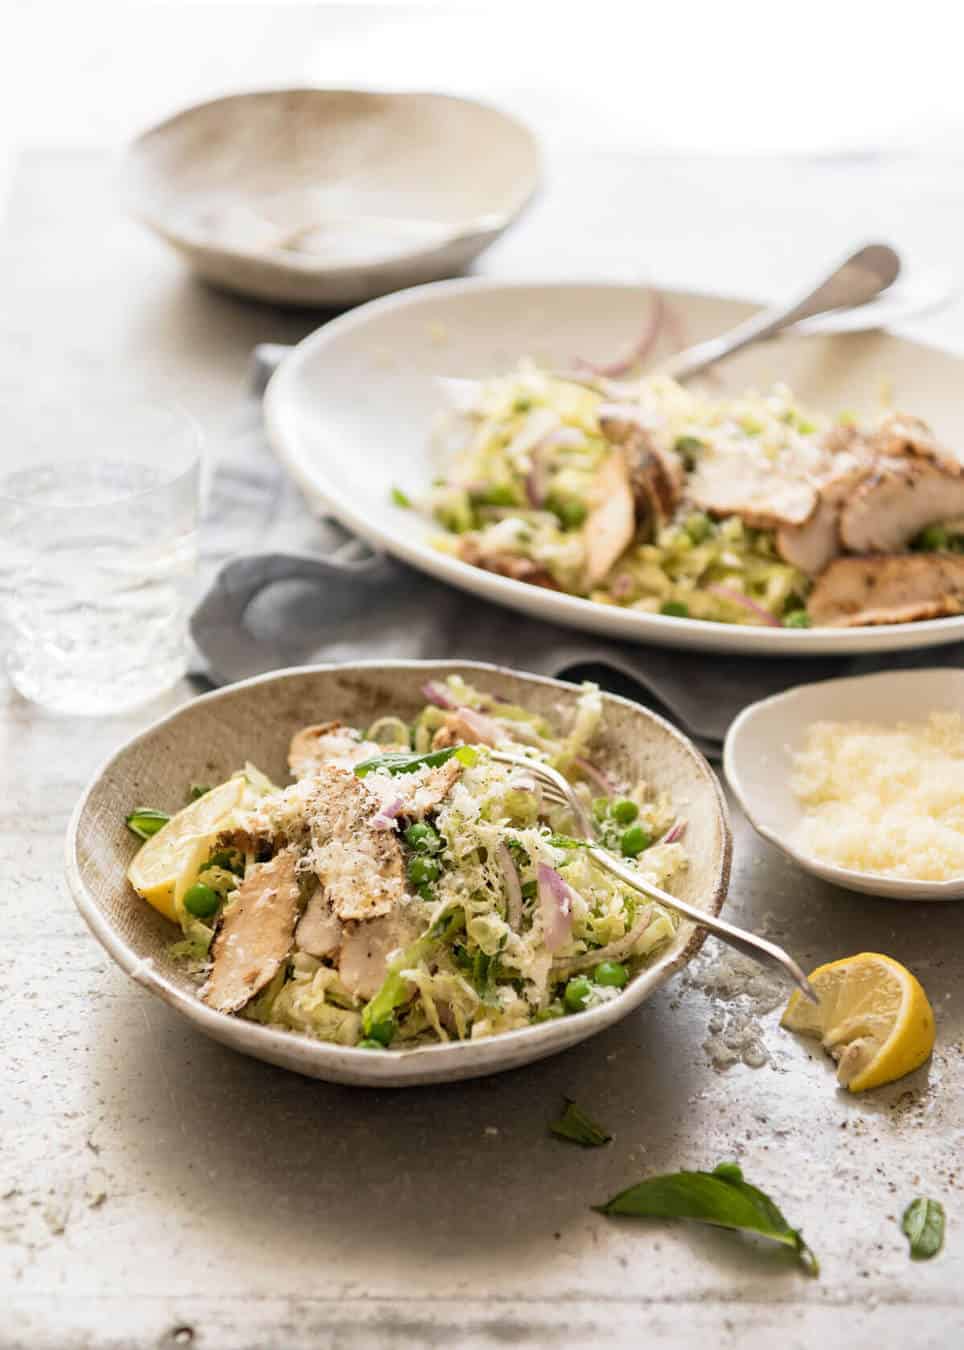 Lemon Parmesan Cabbage Salad with Grilled Chicken - A fabulous utterly addictive salad that you just can't stop eating! recipetineats.com